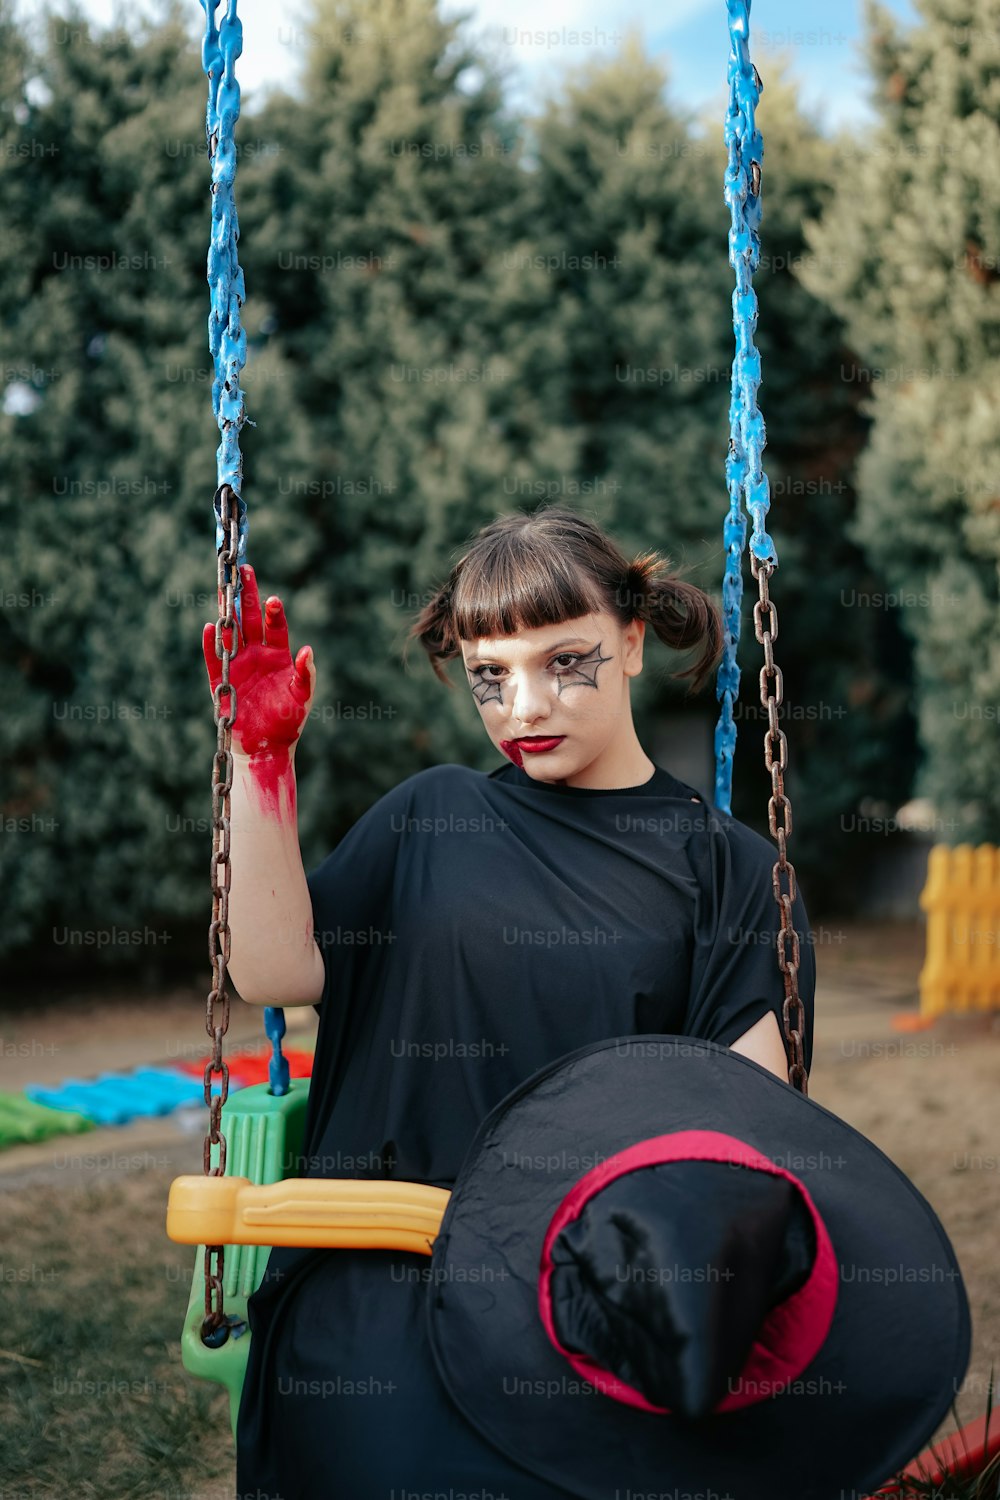 a woman in a witches costume on a swing